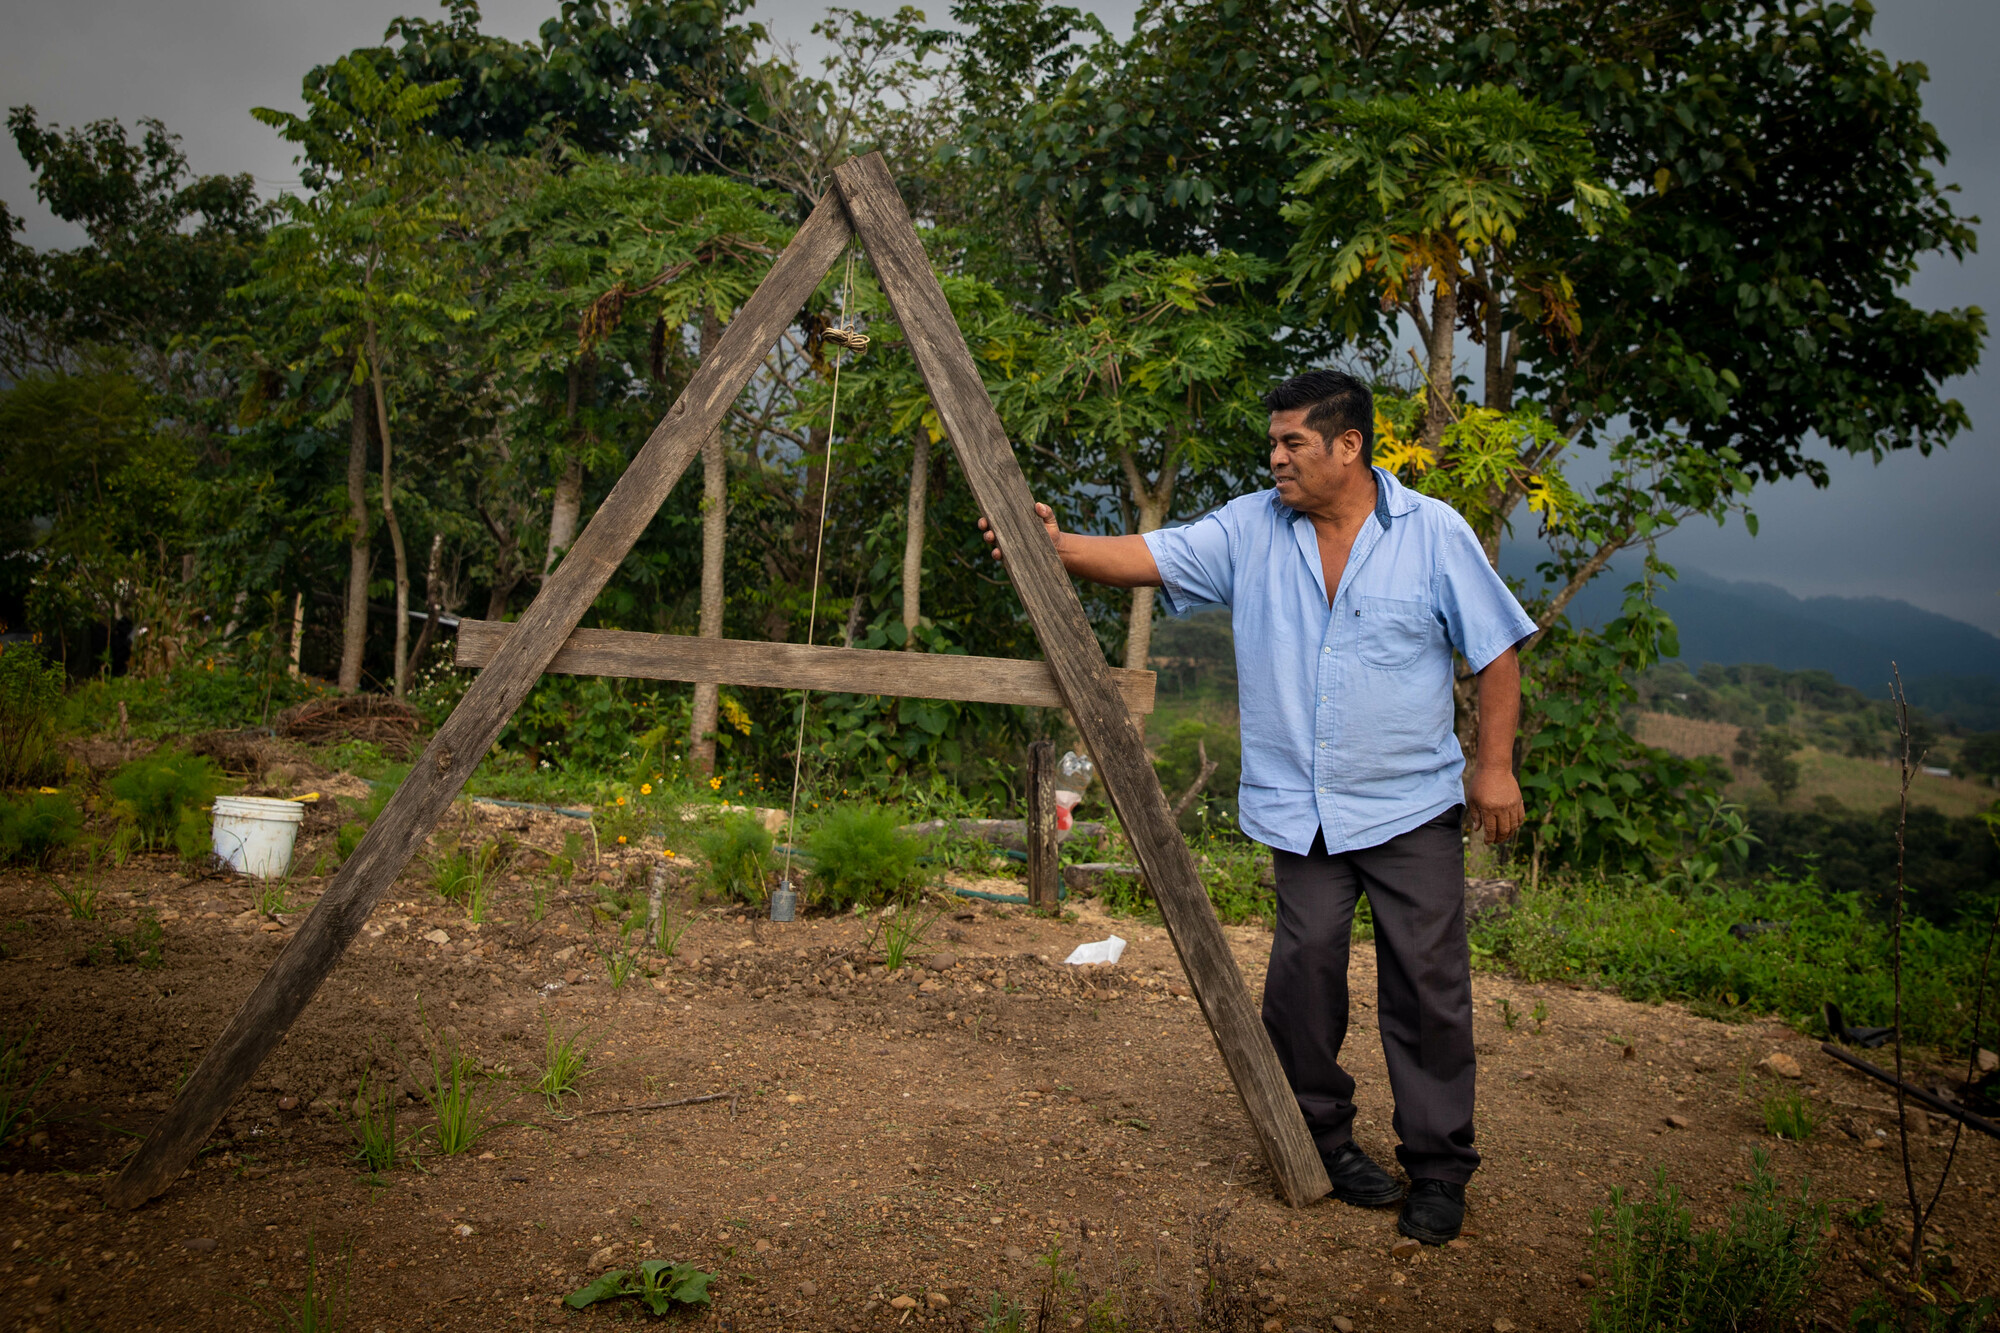 A Mexican man leans againist a wood frame in his garden